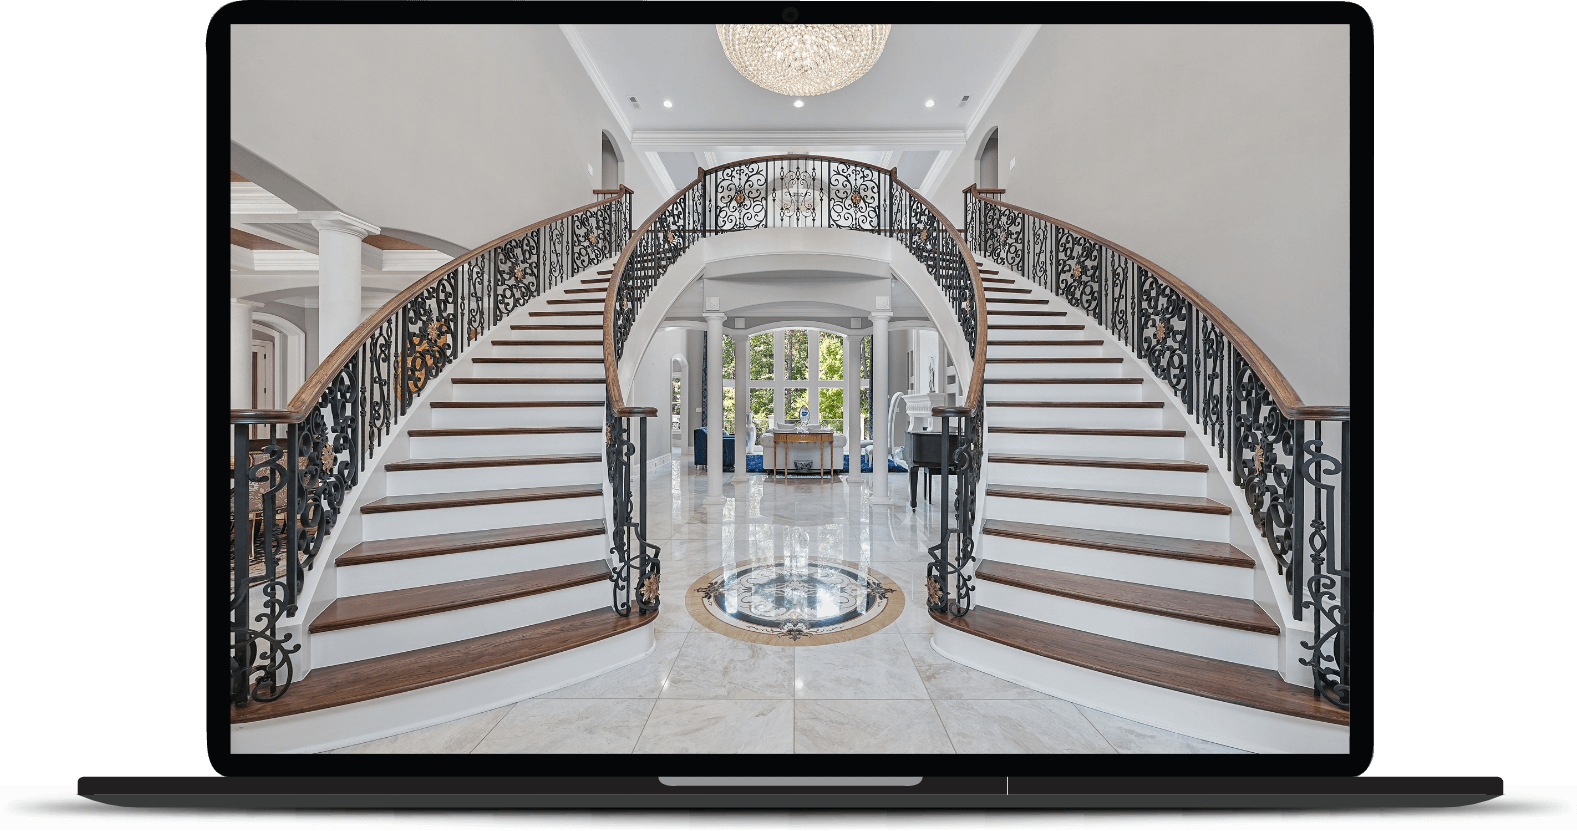 Marble entryway with double stairs